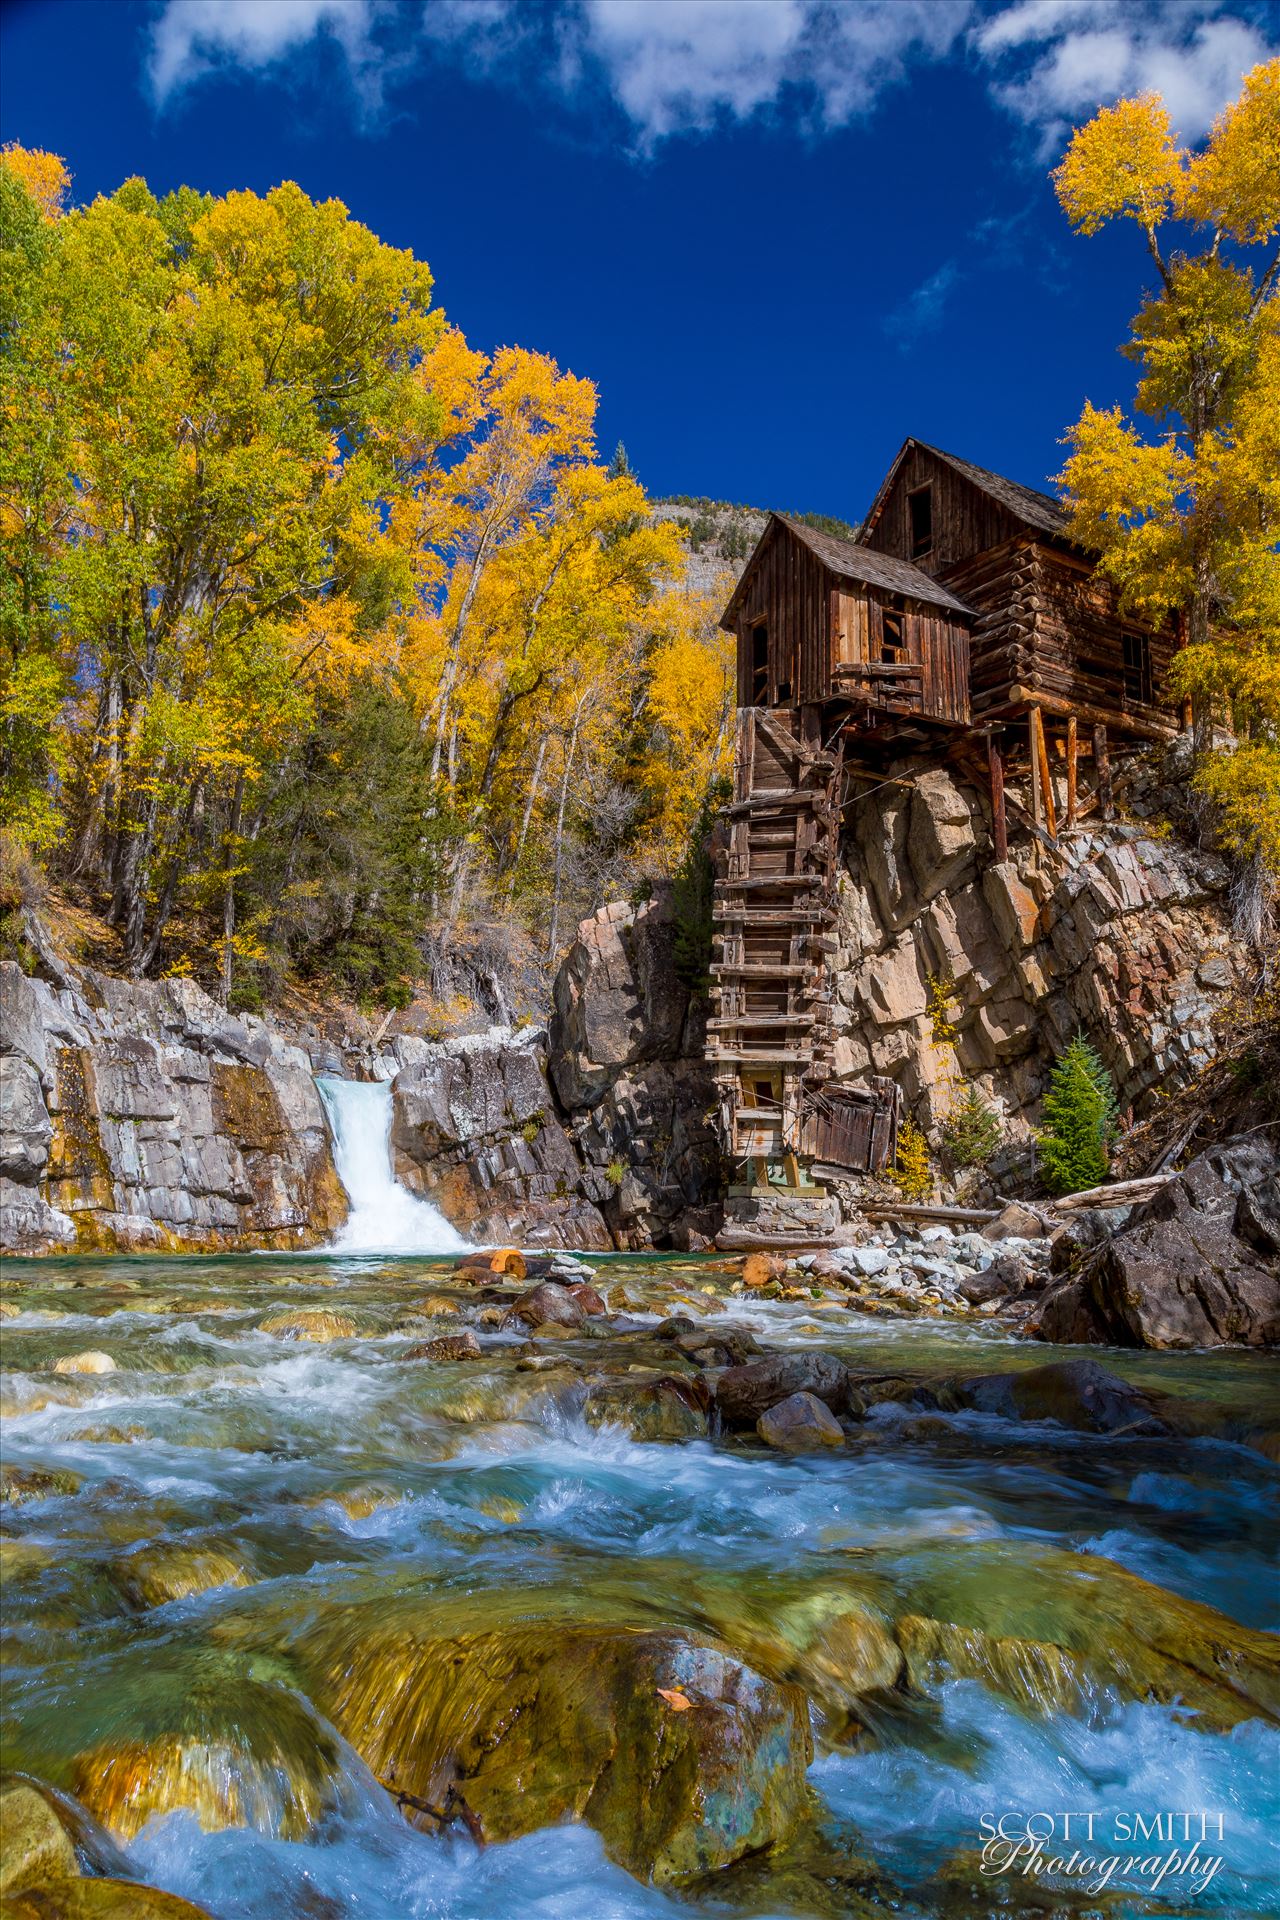 Crystal Mill, Colorado 04 - The Crystal Mill, or the Old Mill is an 1892 wooden powerhouse located on an outcrop above the Crystal River in Crystal, Colorado by Scott Smith Photos